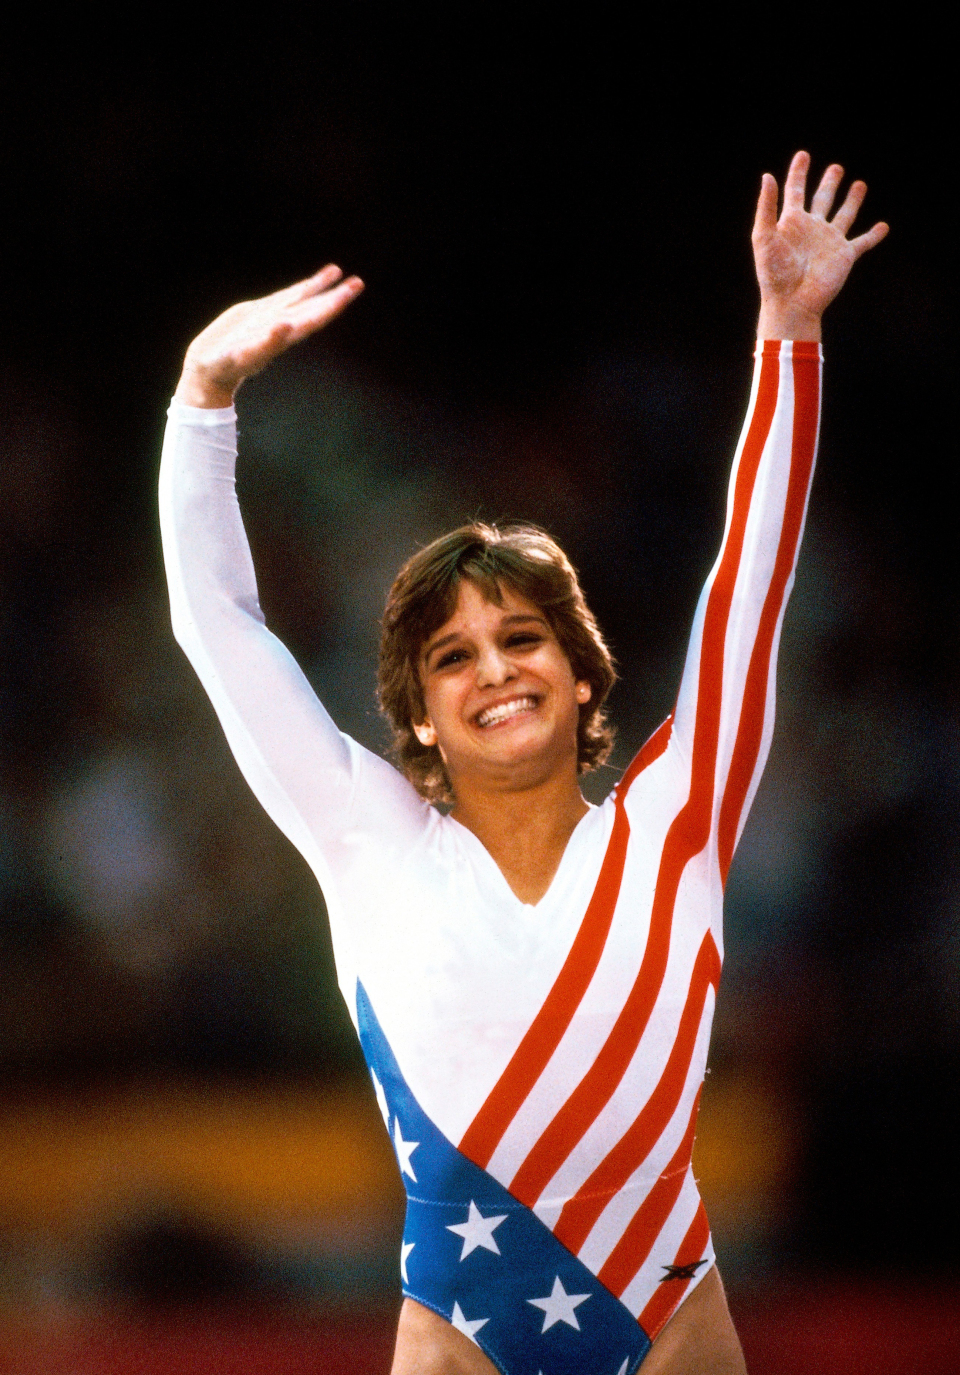 Mary Lou Retton, Racing against the Giant and Winning WOGymnastika